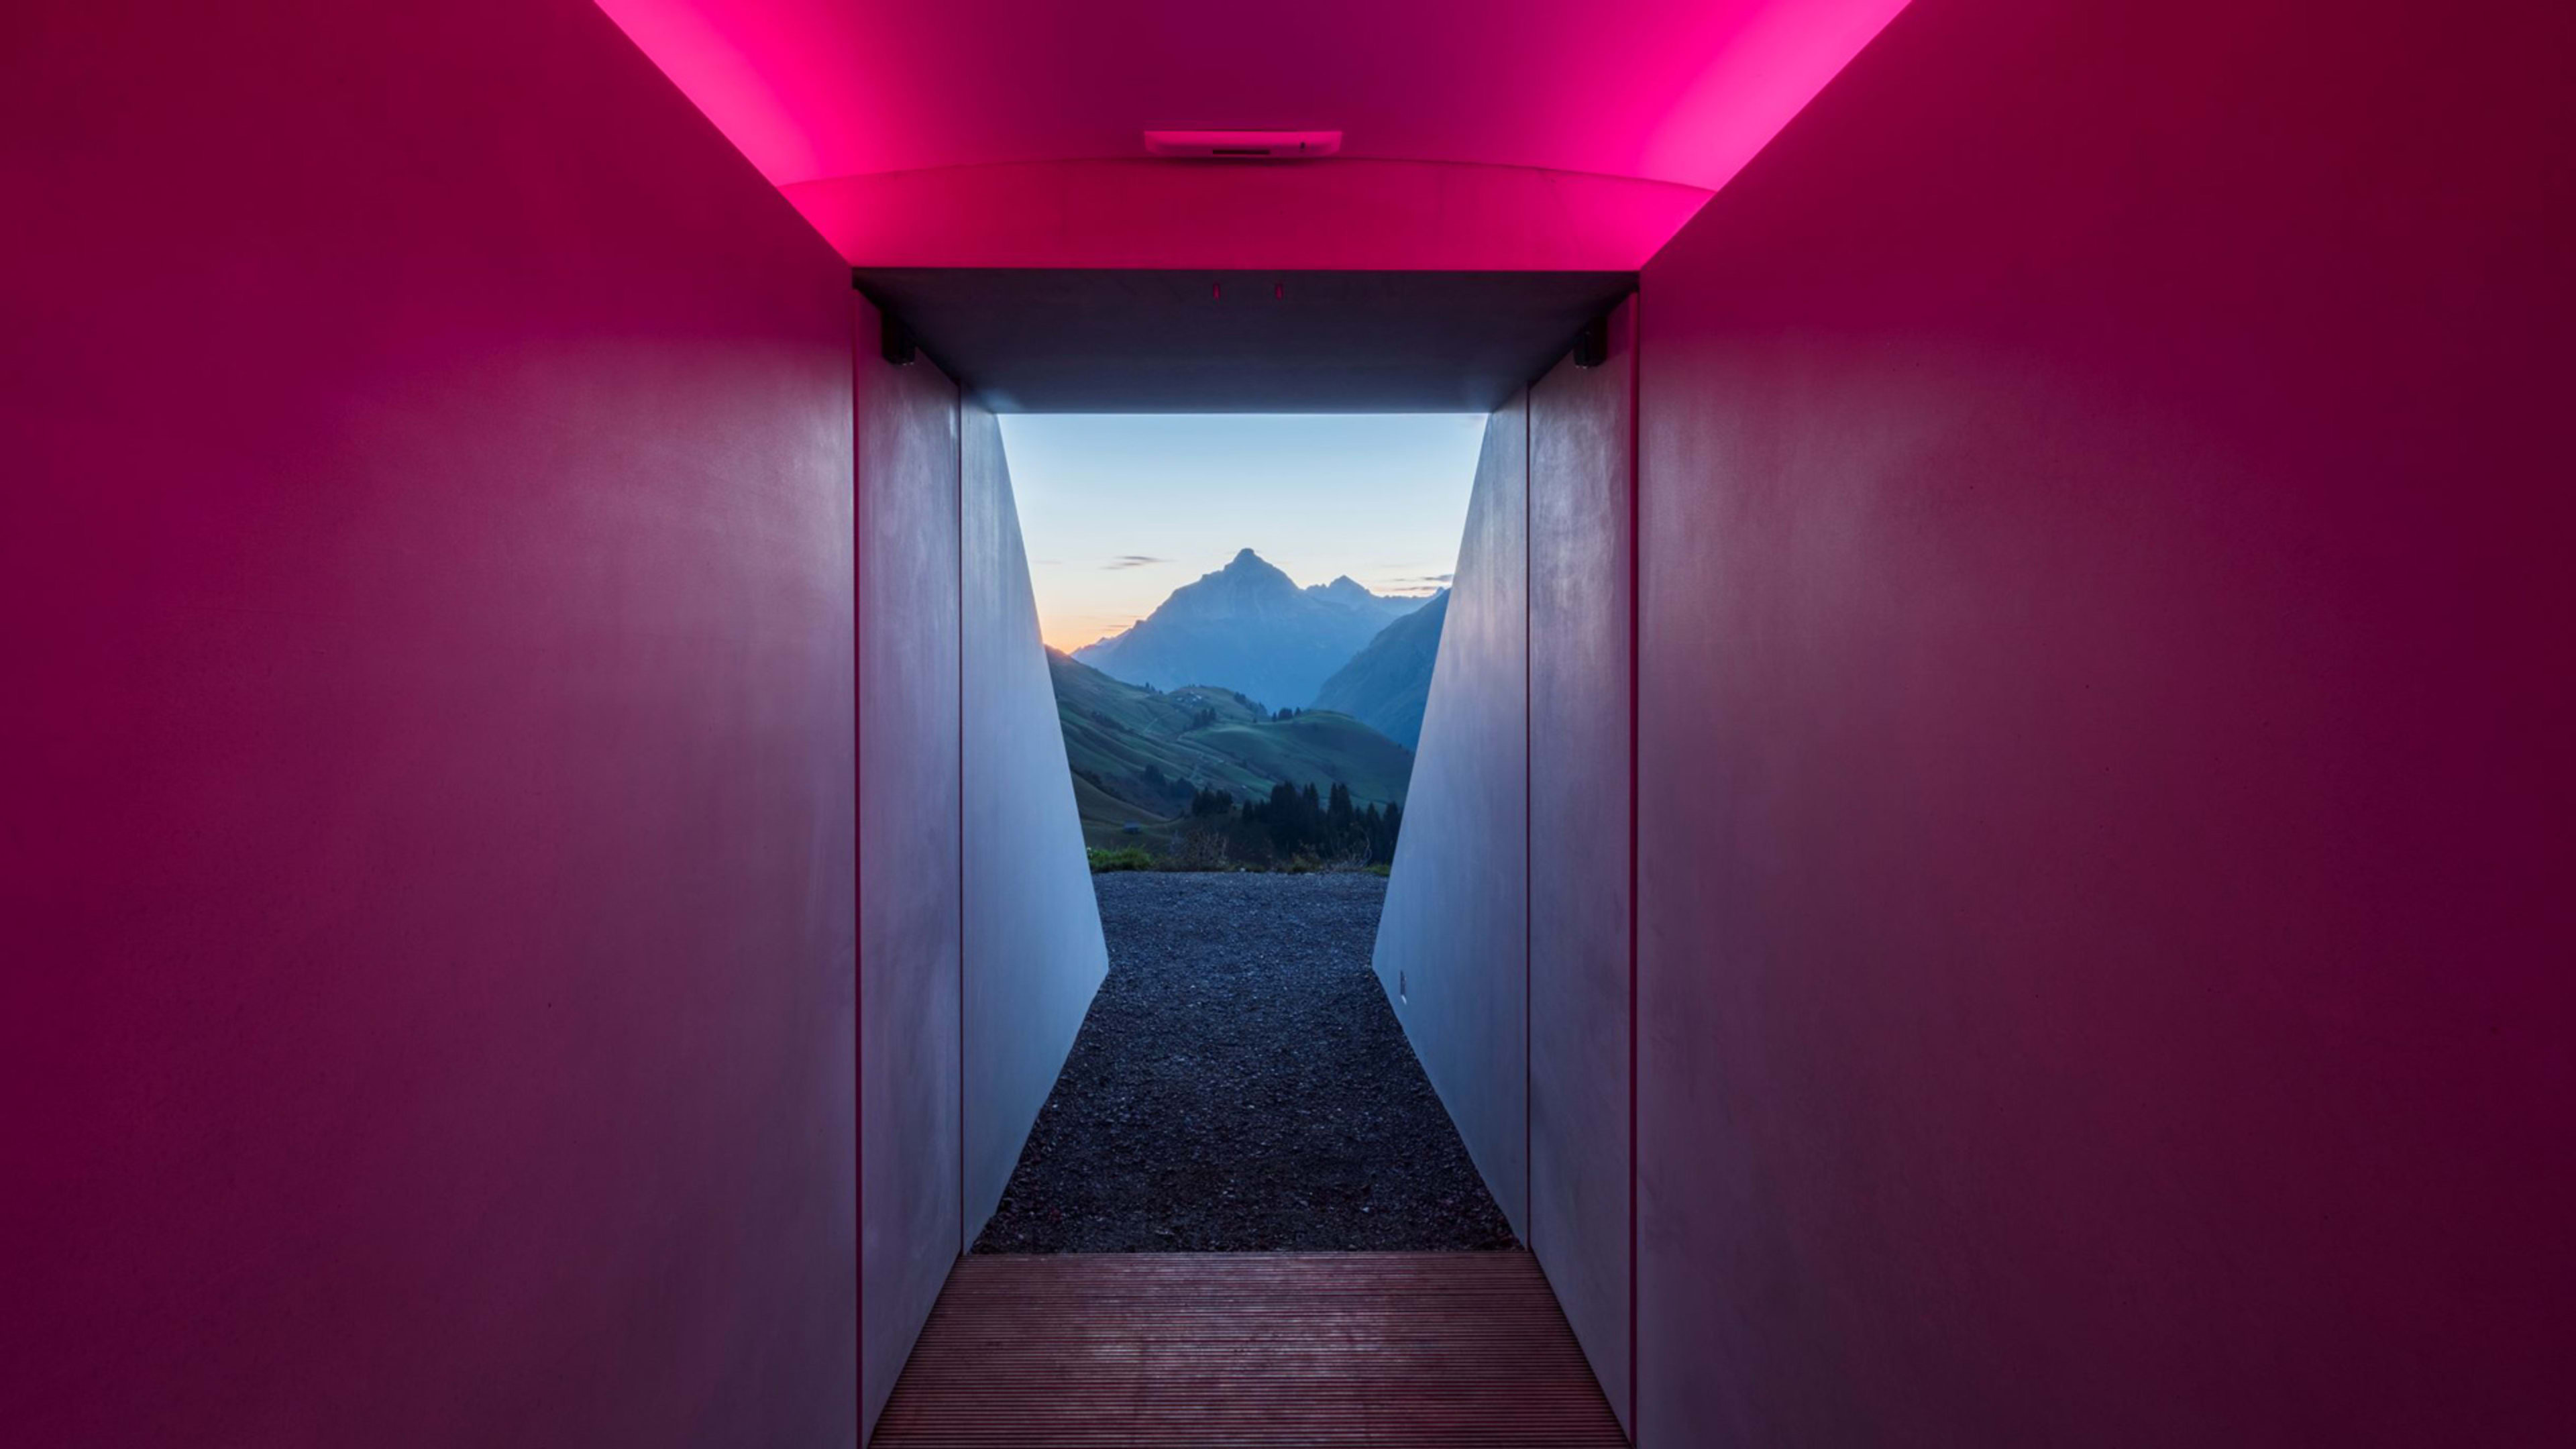 The best James Turrell skyspace is the one you can ski to